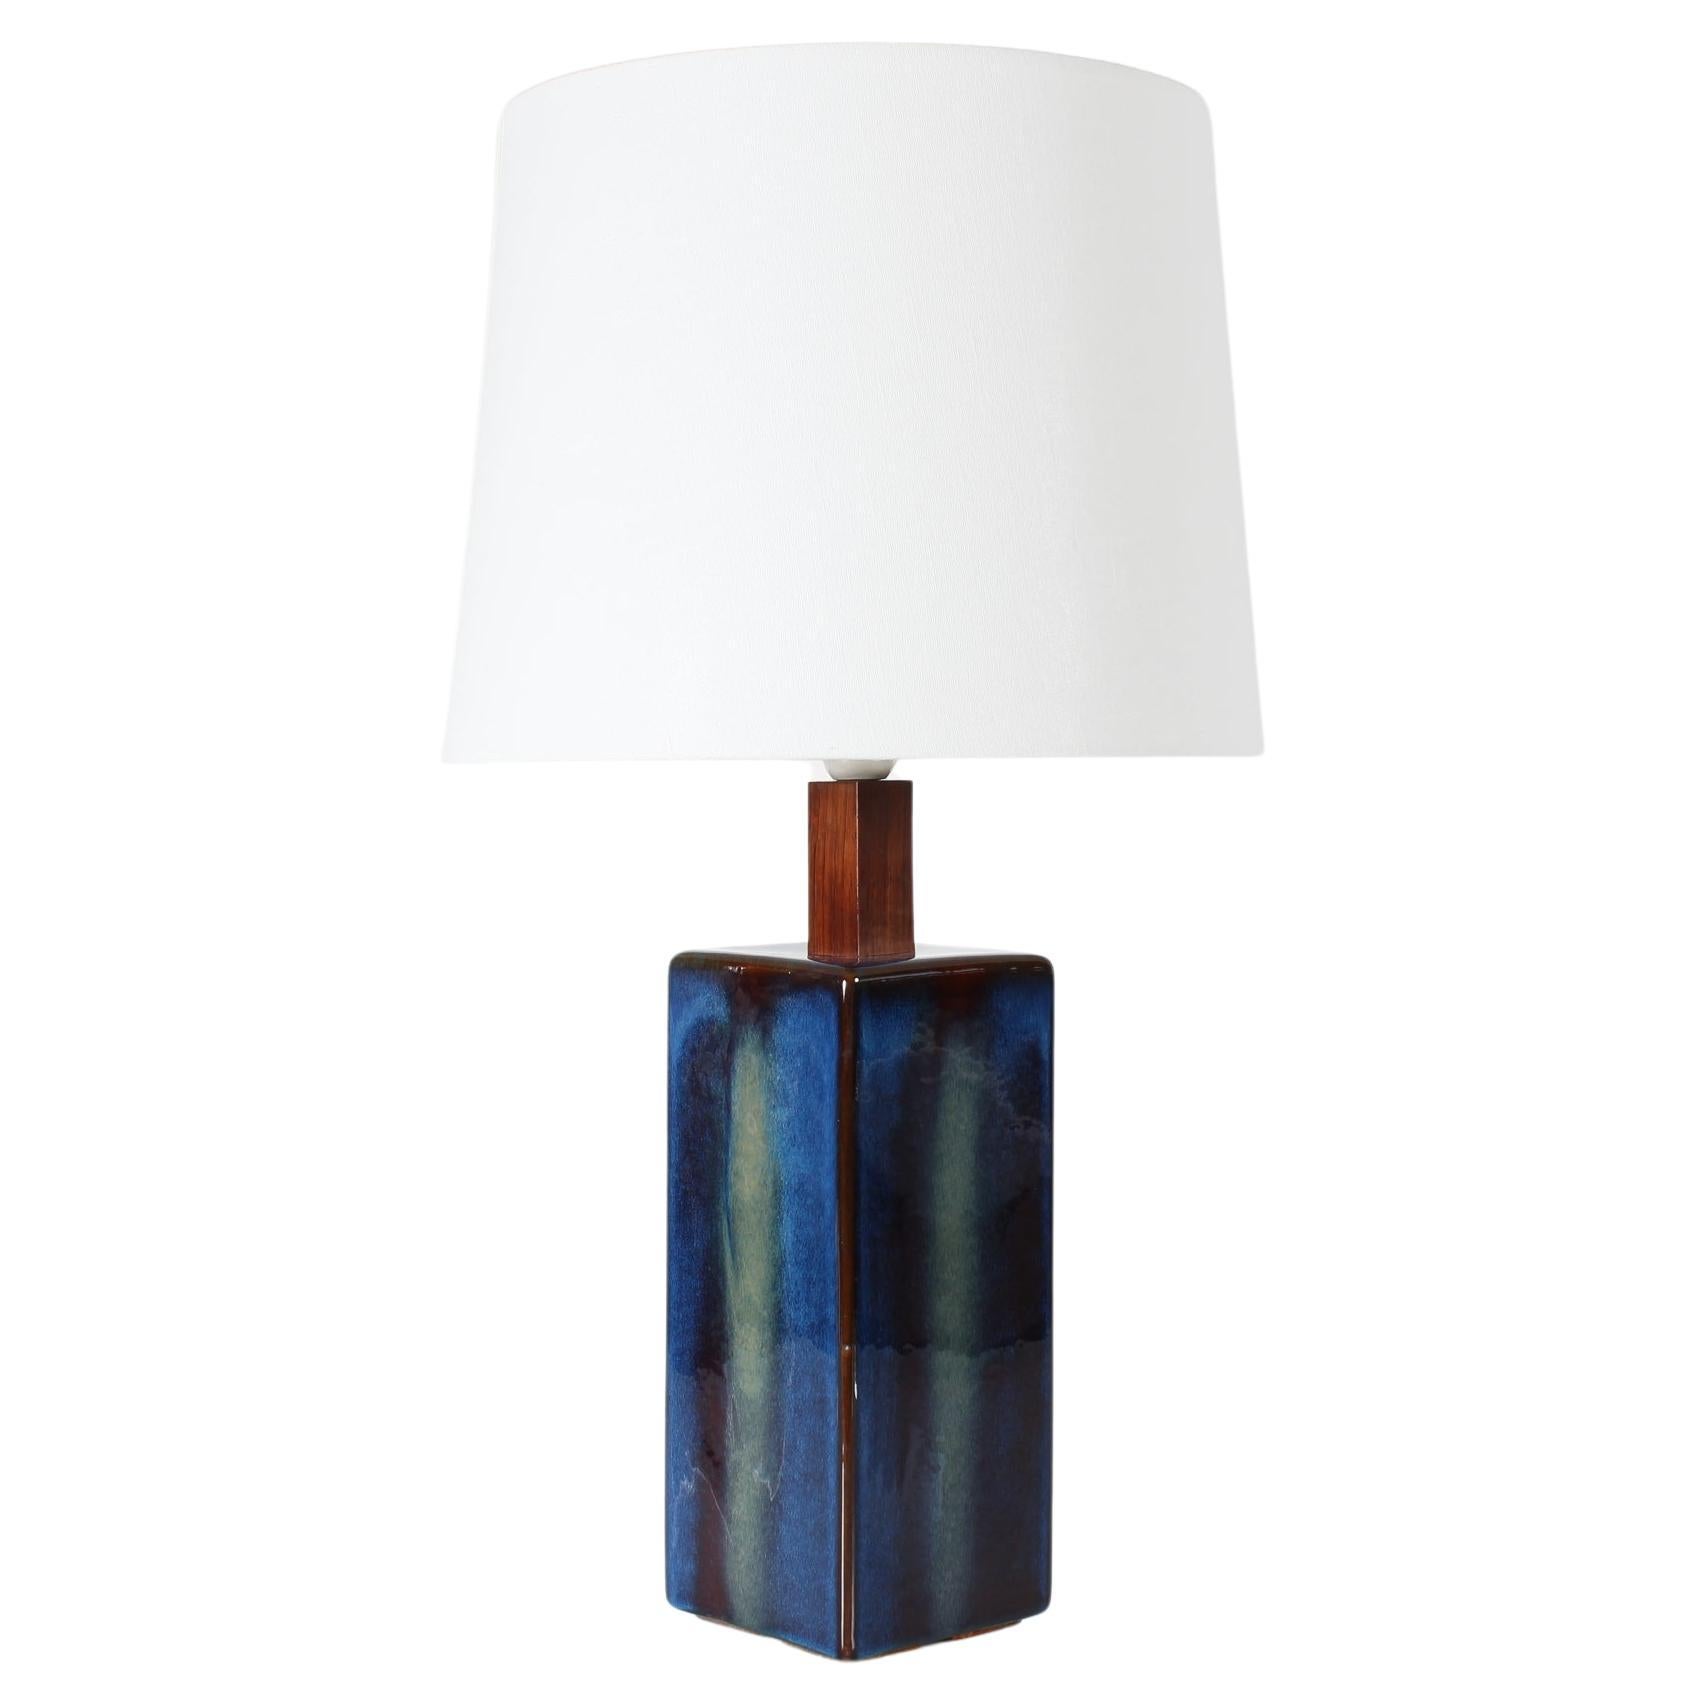 Tall Danish Sculptural Table Lamp with Glossy Dark Blue Green Glaze by Søholm  For Sale